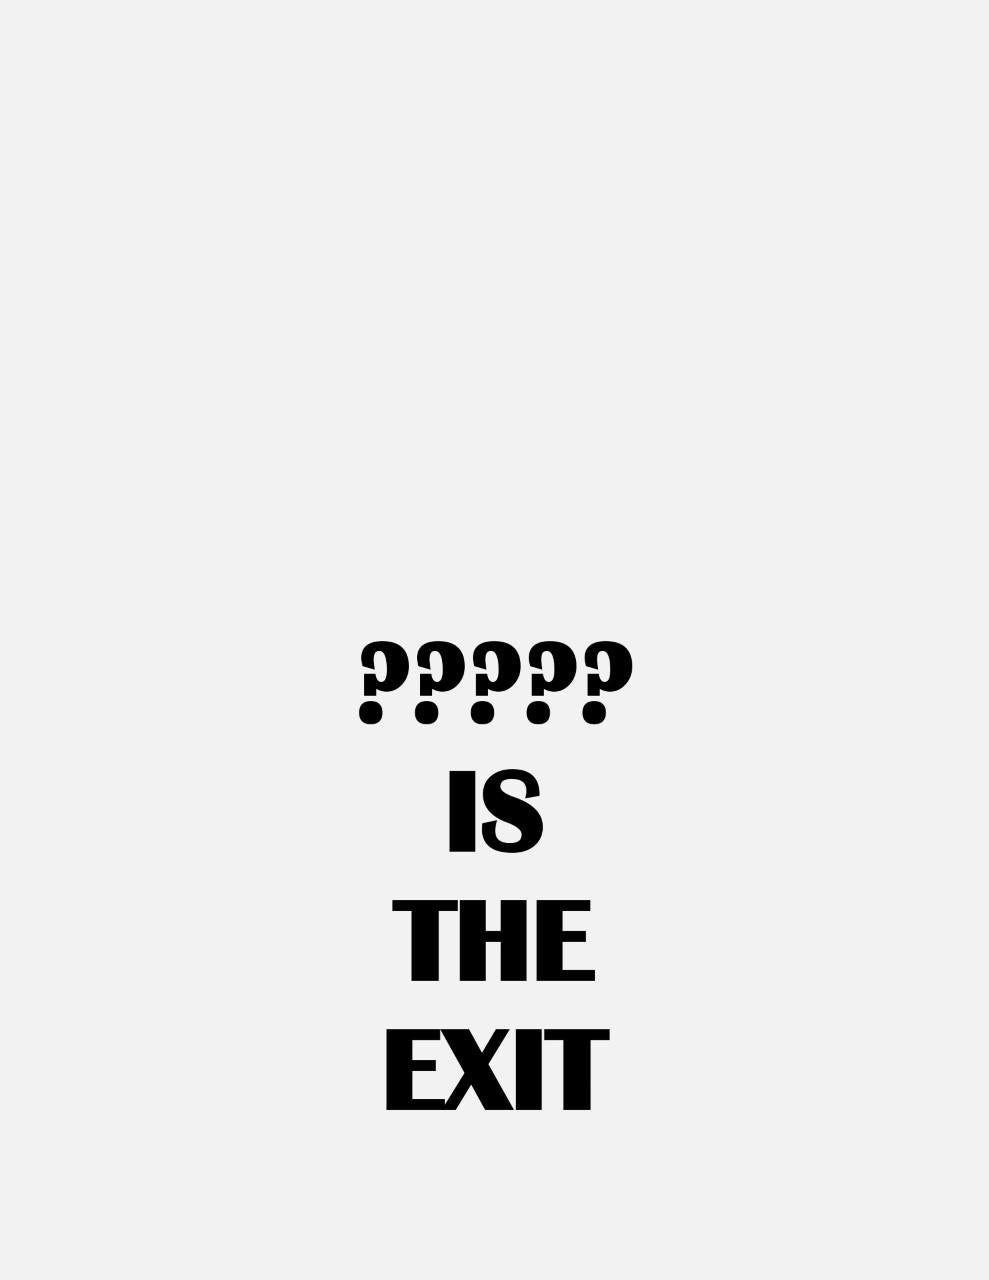 PLAYLIST WHERE IS THE EXIT - Mixed Media Art by Mukesh Shah